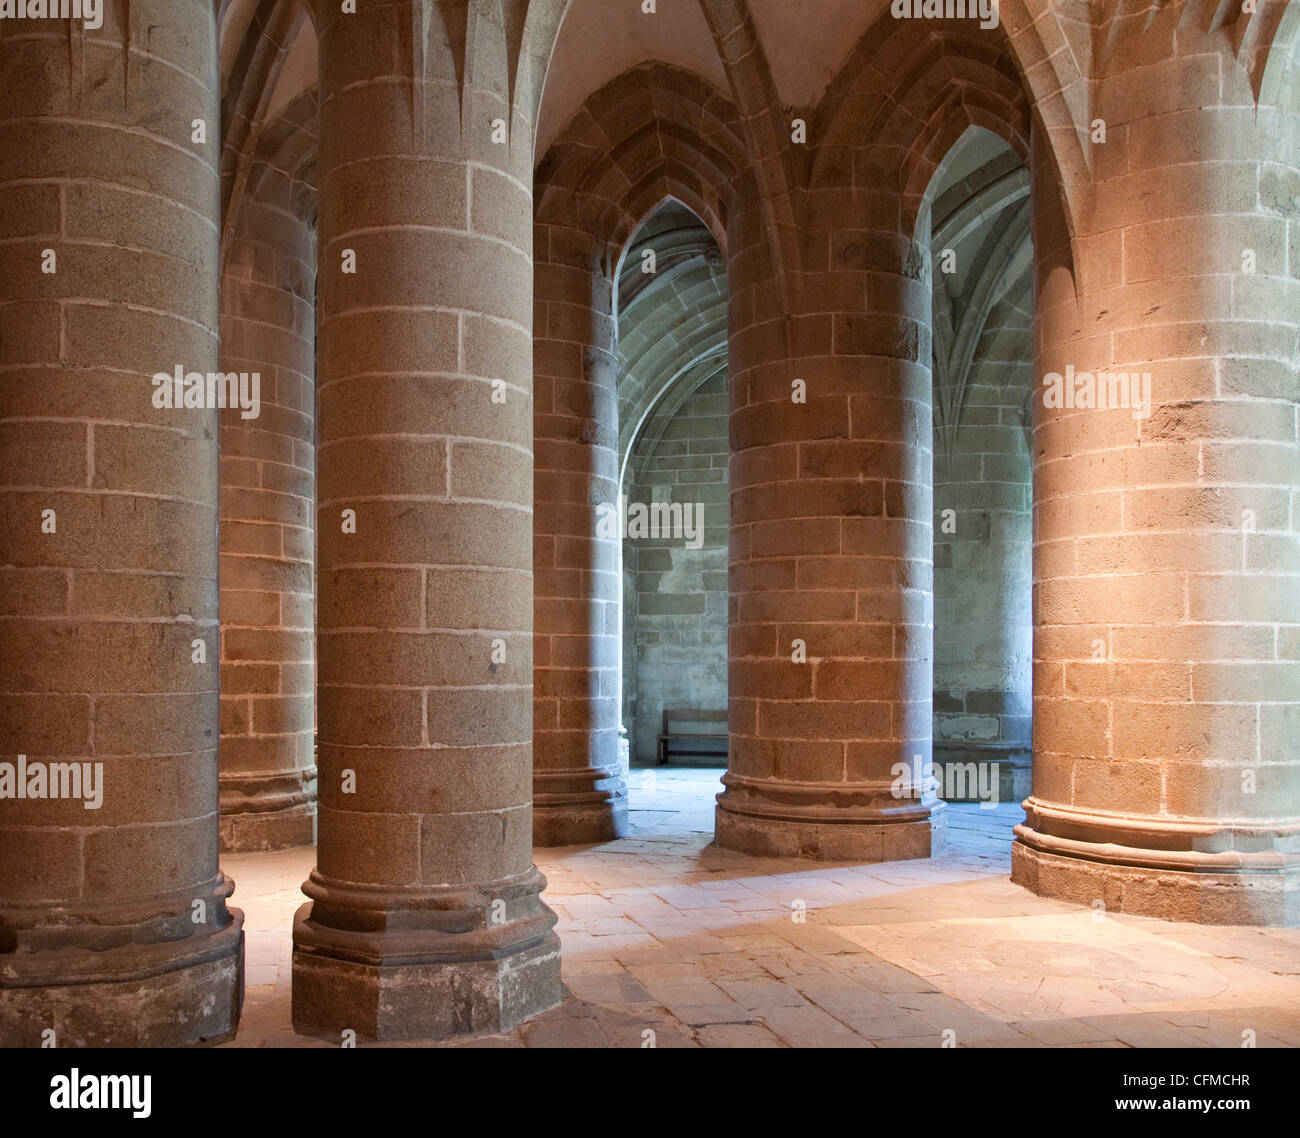 Crypt of the Massive Pillars, Mont St. Michel Abbey, UNESCO World Heritage Site, Normandy, France, Europe Stock Photo